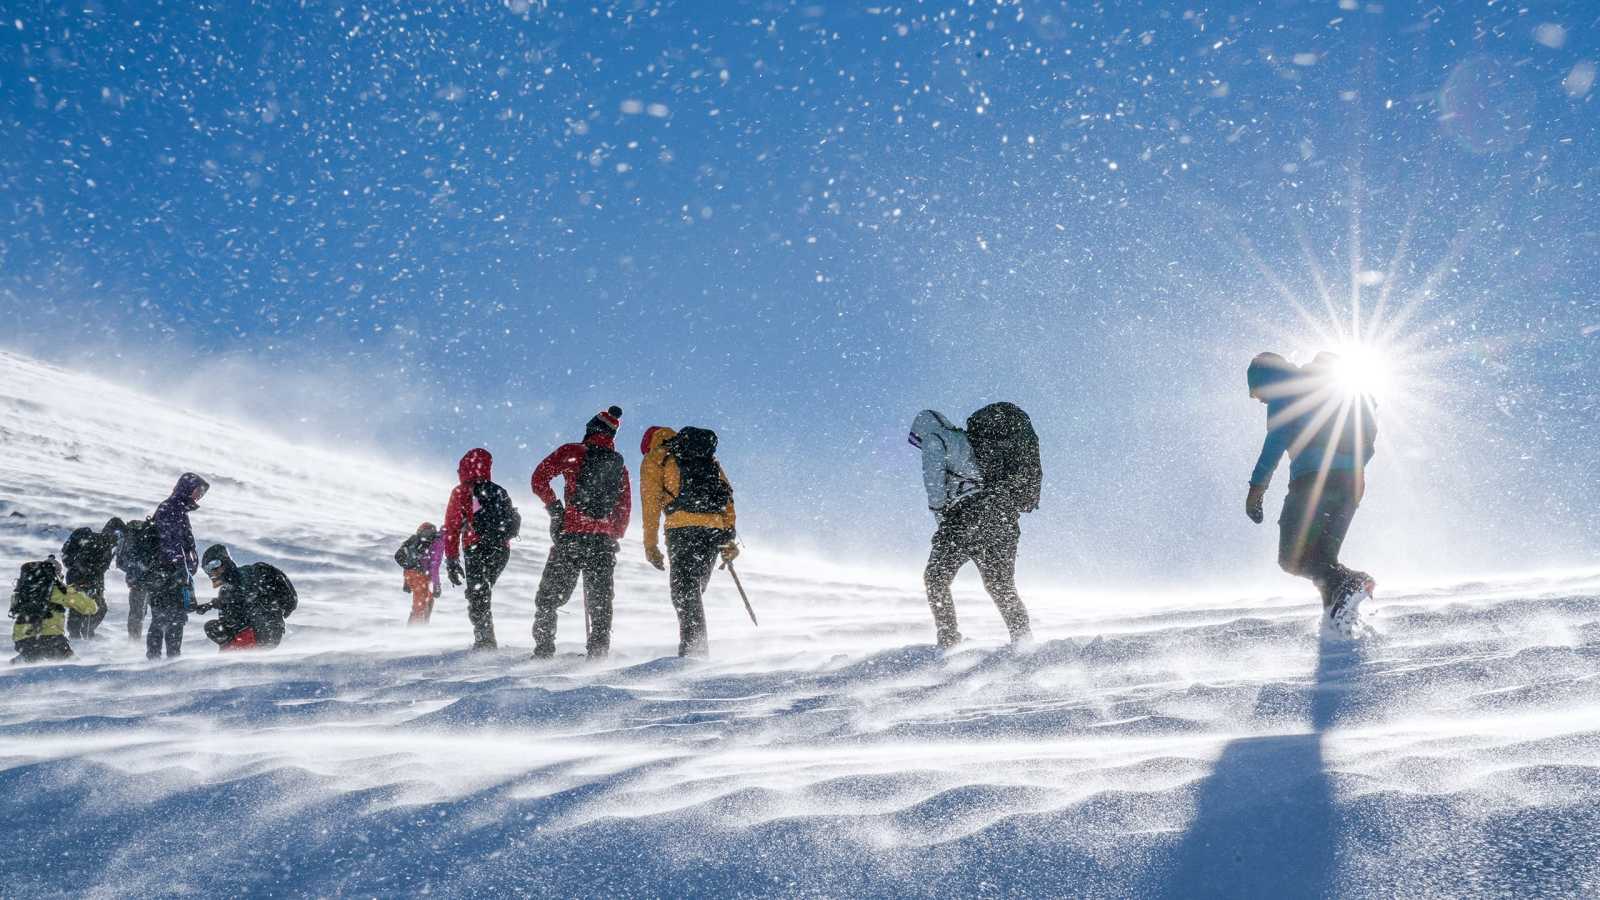 A group of hikers making their way through the snow in the sun.